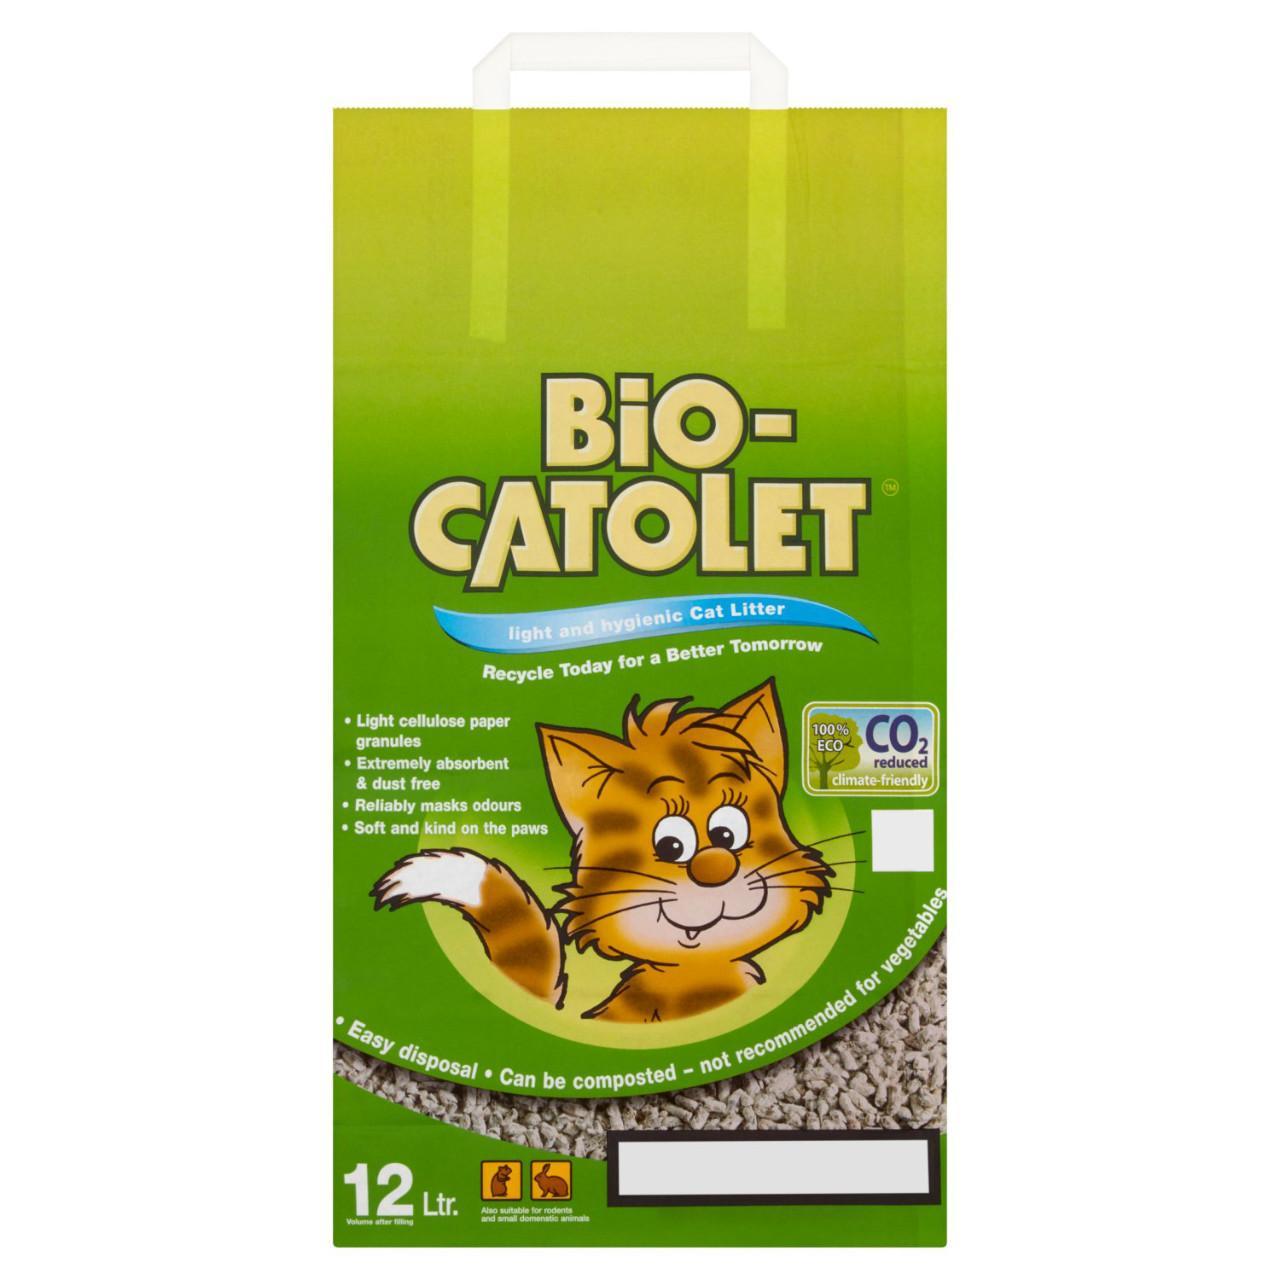 An image of Bio-Catolet Cat Litter